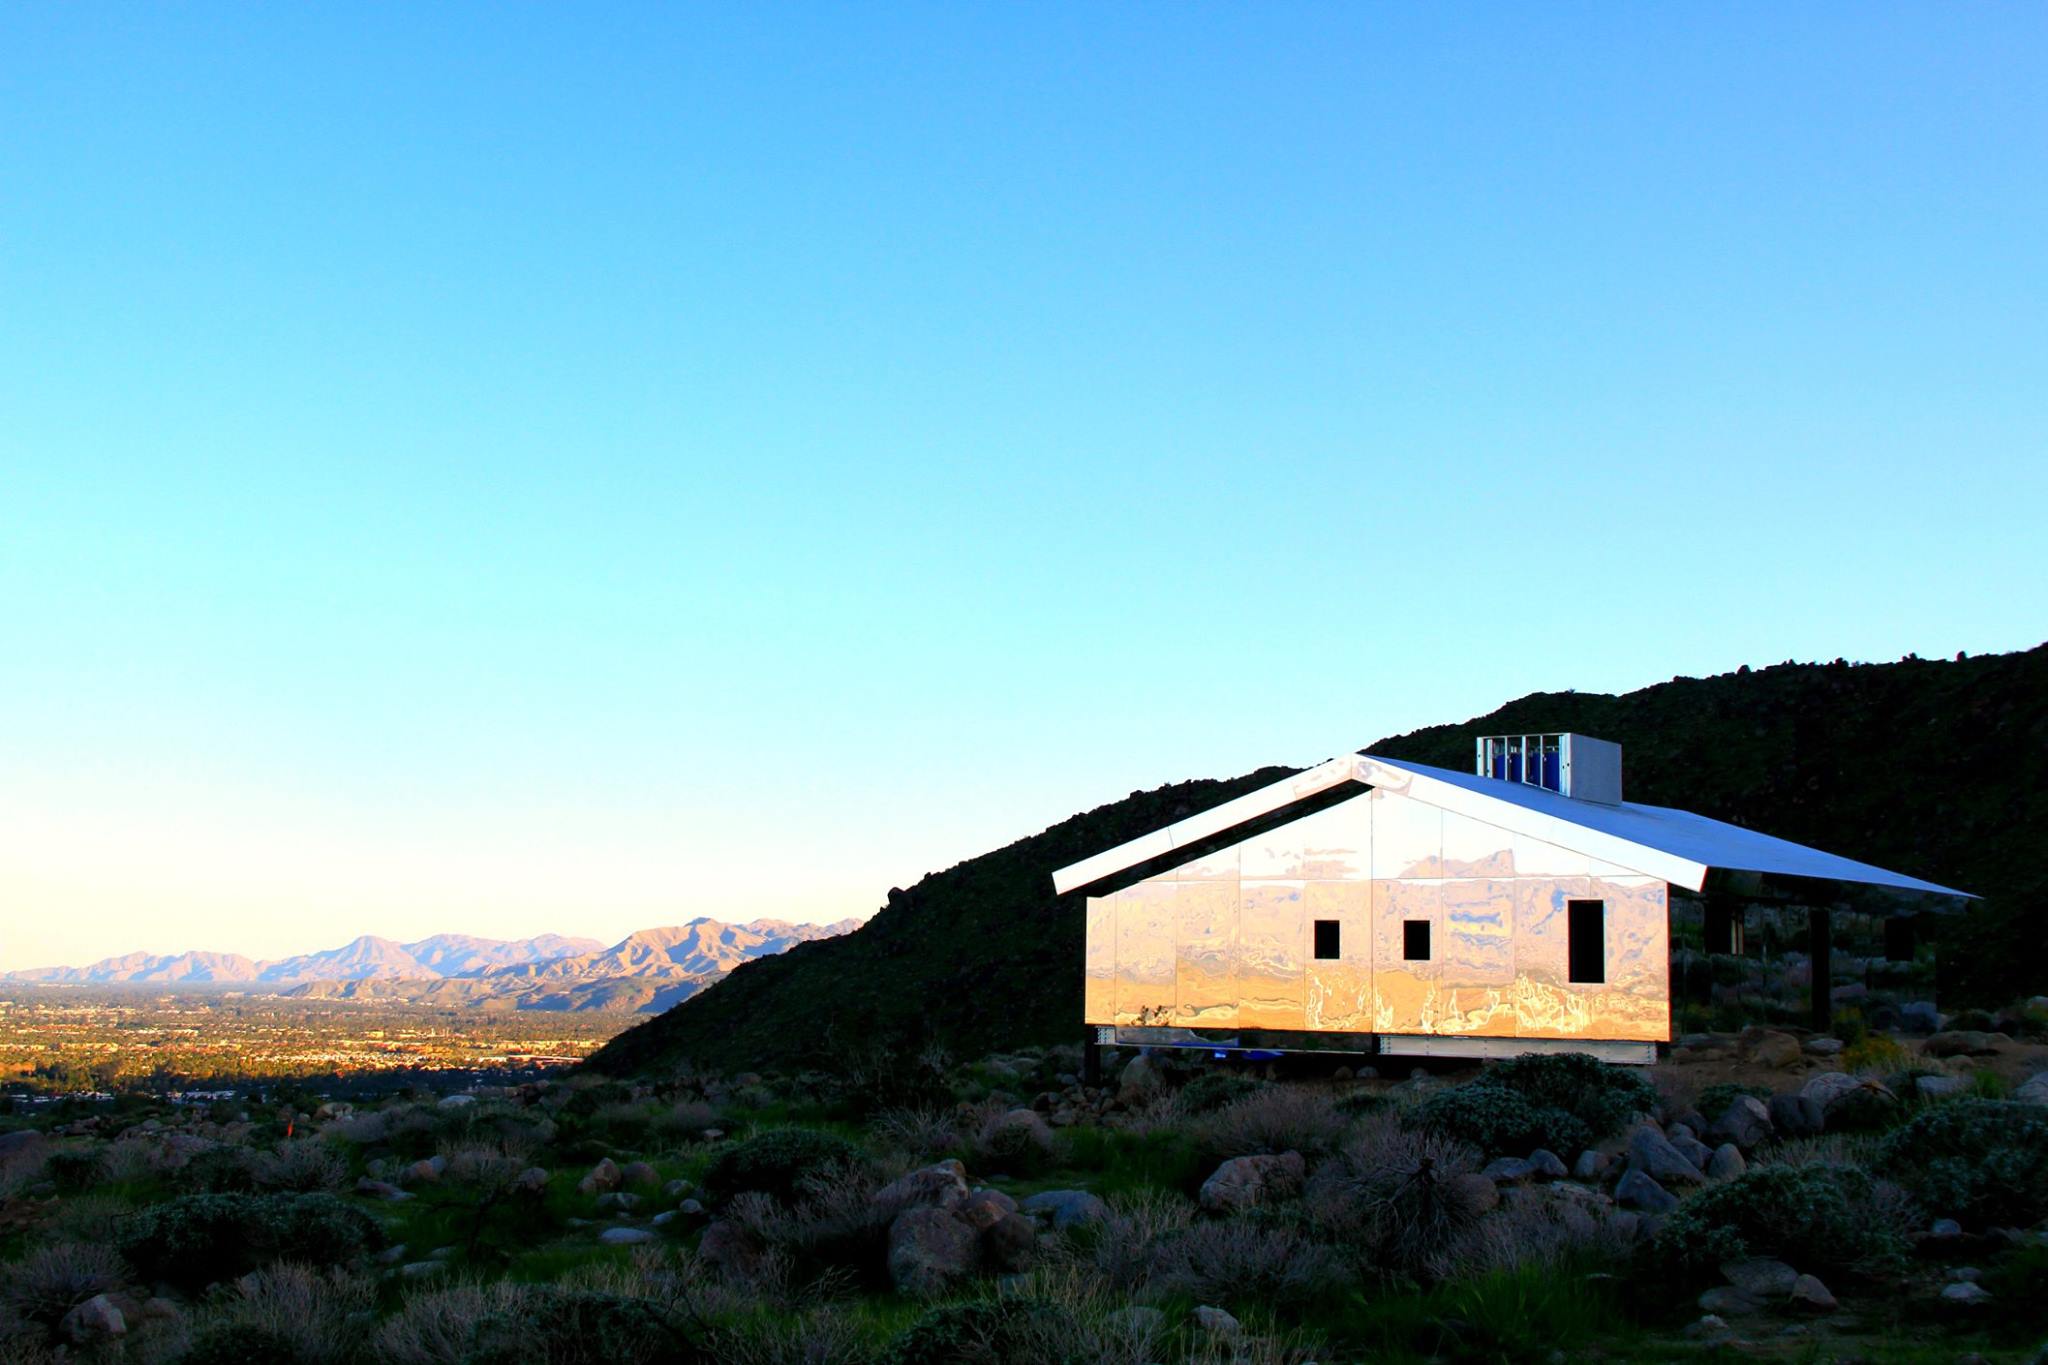 Mirage mirrored house by Doug Aitken in mountains of Palm Springs